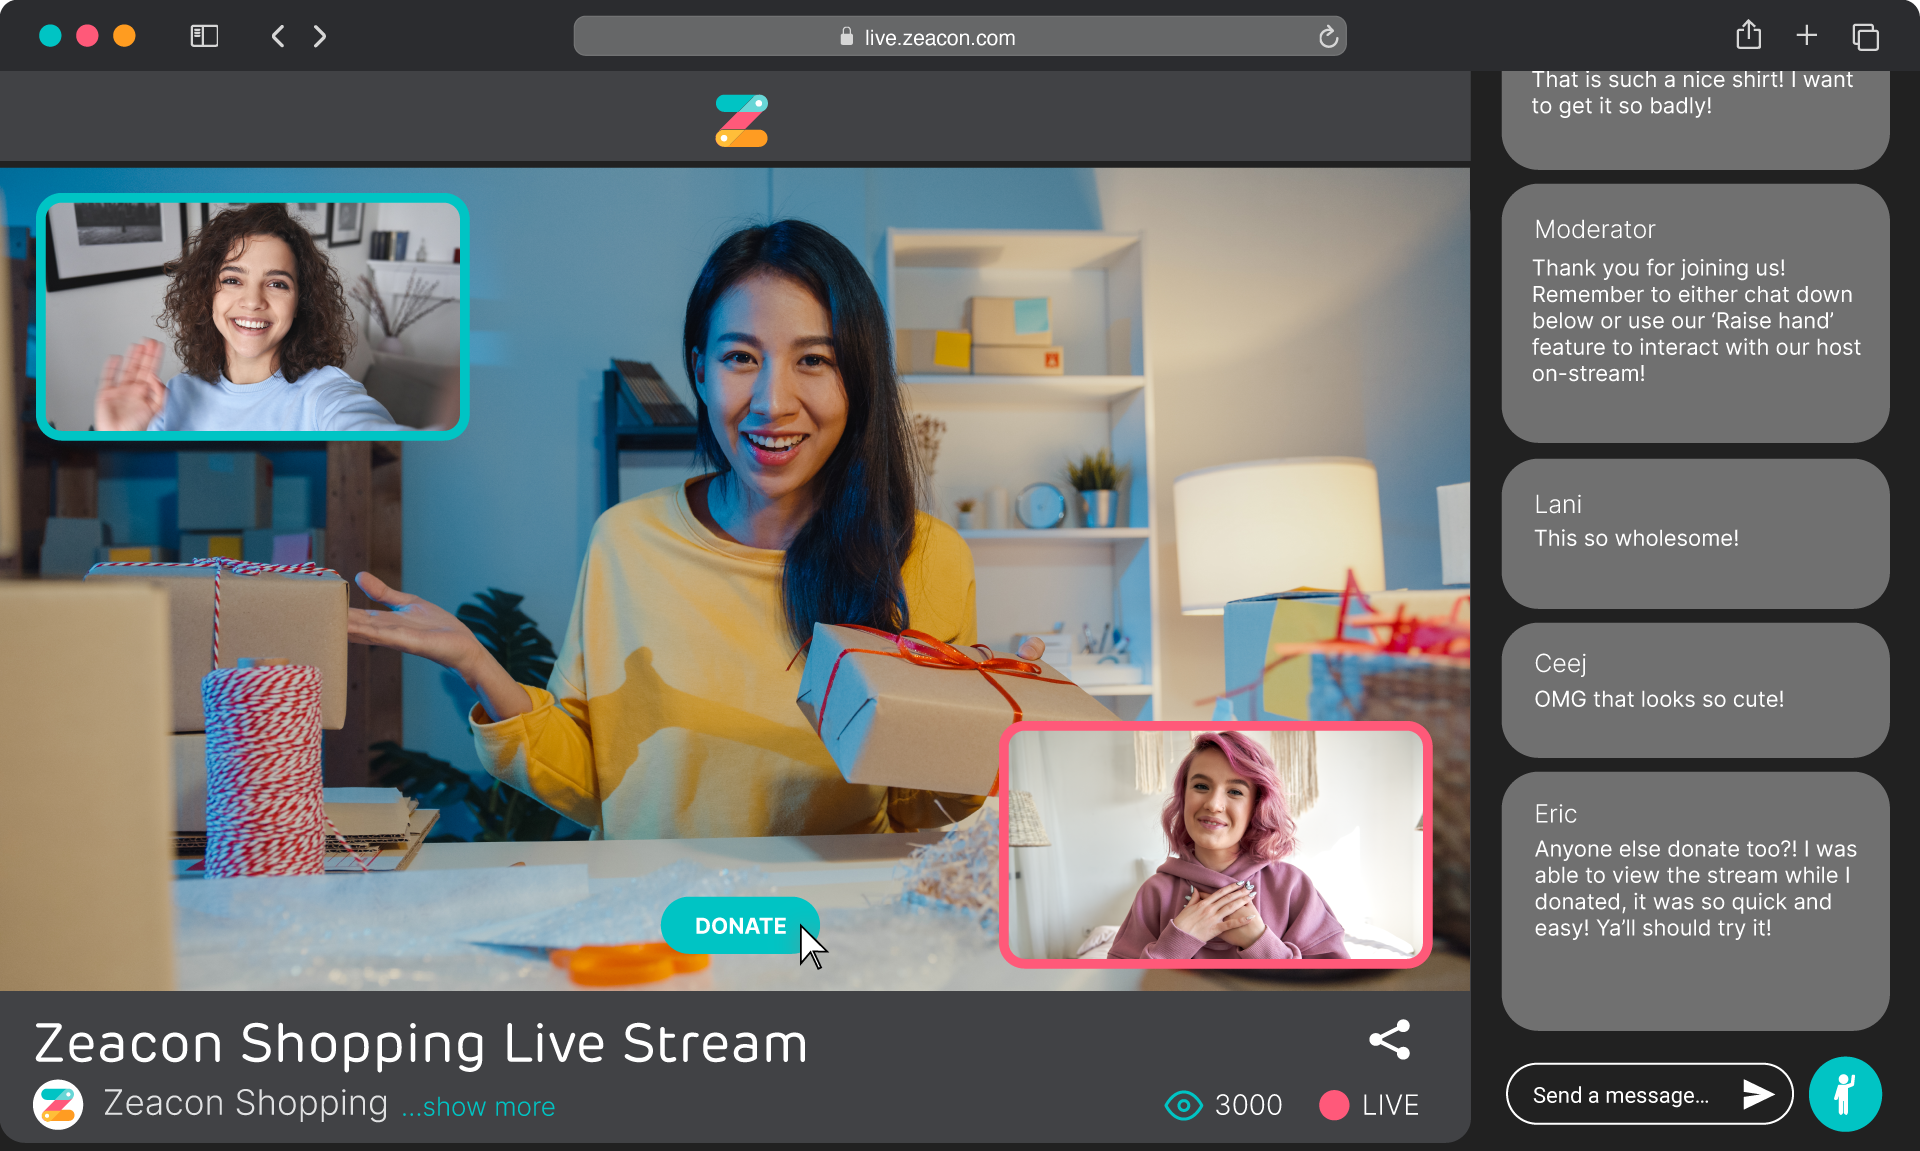 Zeacon Live Studio: The free, easy-to-use live streaming interaction platform that is already changing the way people connect with their communities.